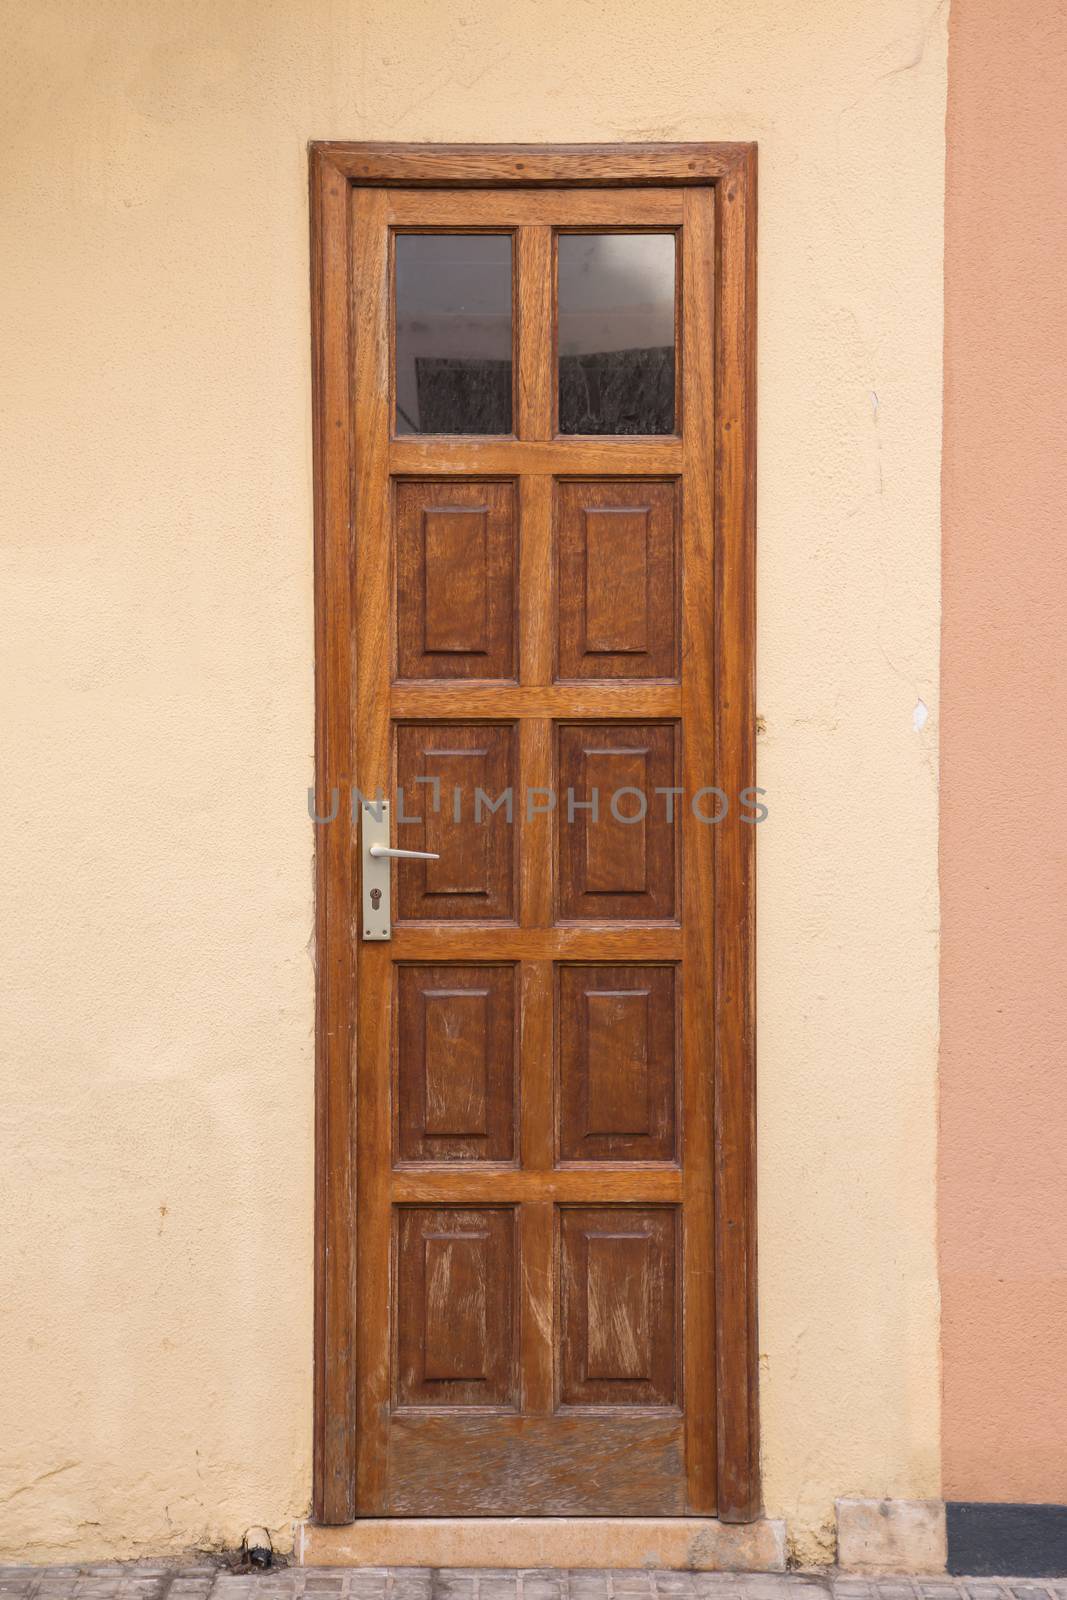 A wooden door with small windows above by sandra_fotodesign